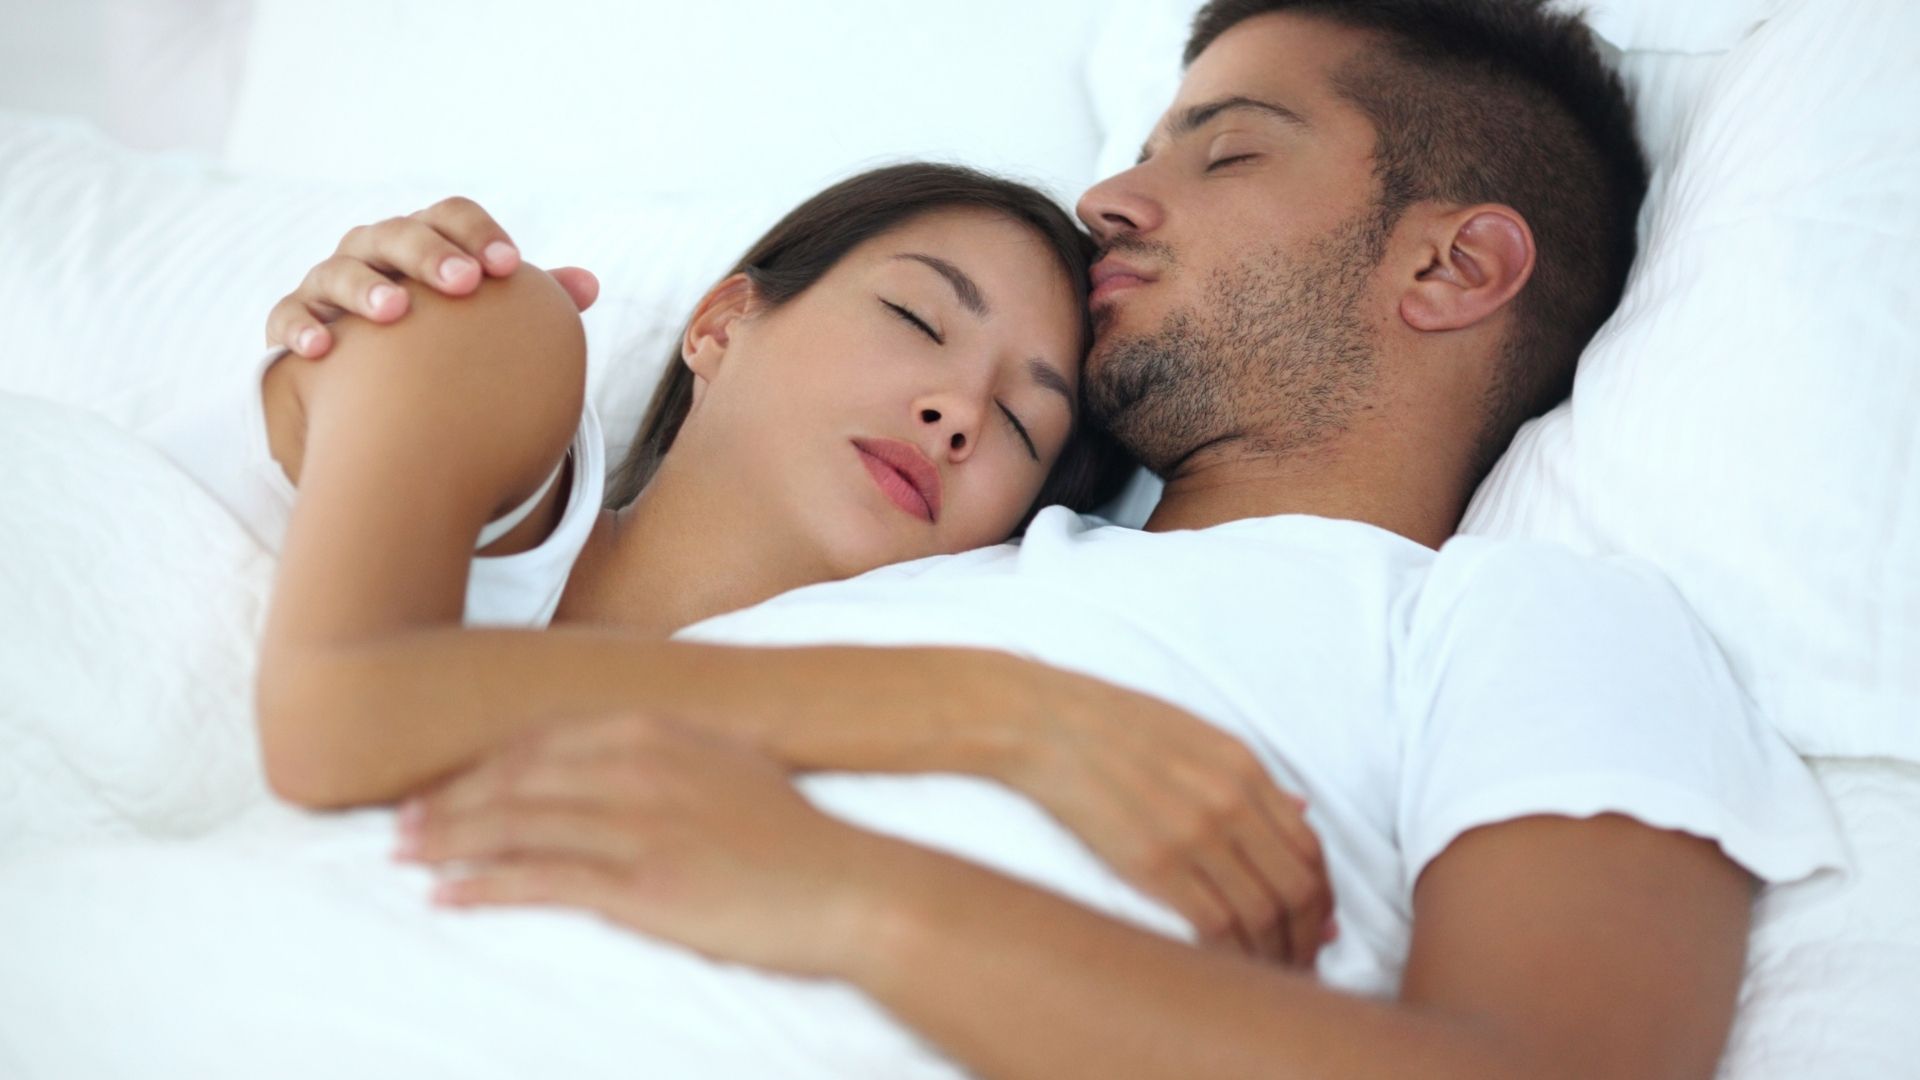 Women in stable relationships have better quality sleep than singles